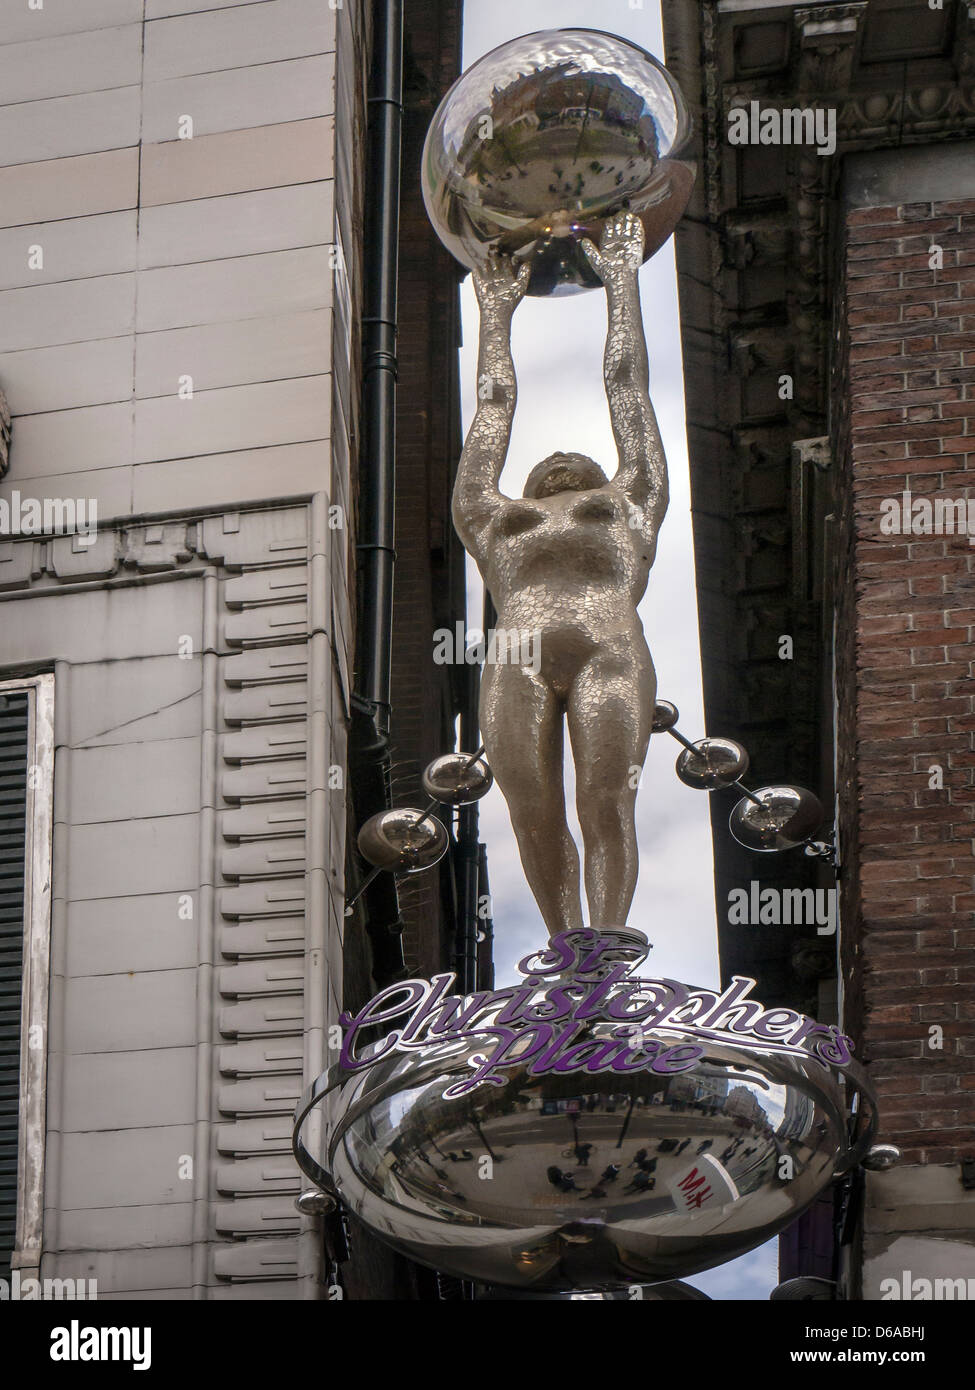 LONDON, UK - APRIL 14, 2013: Statue at the entrance to St Christopher's Place Stock Photo